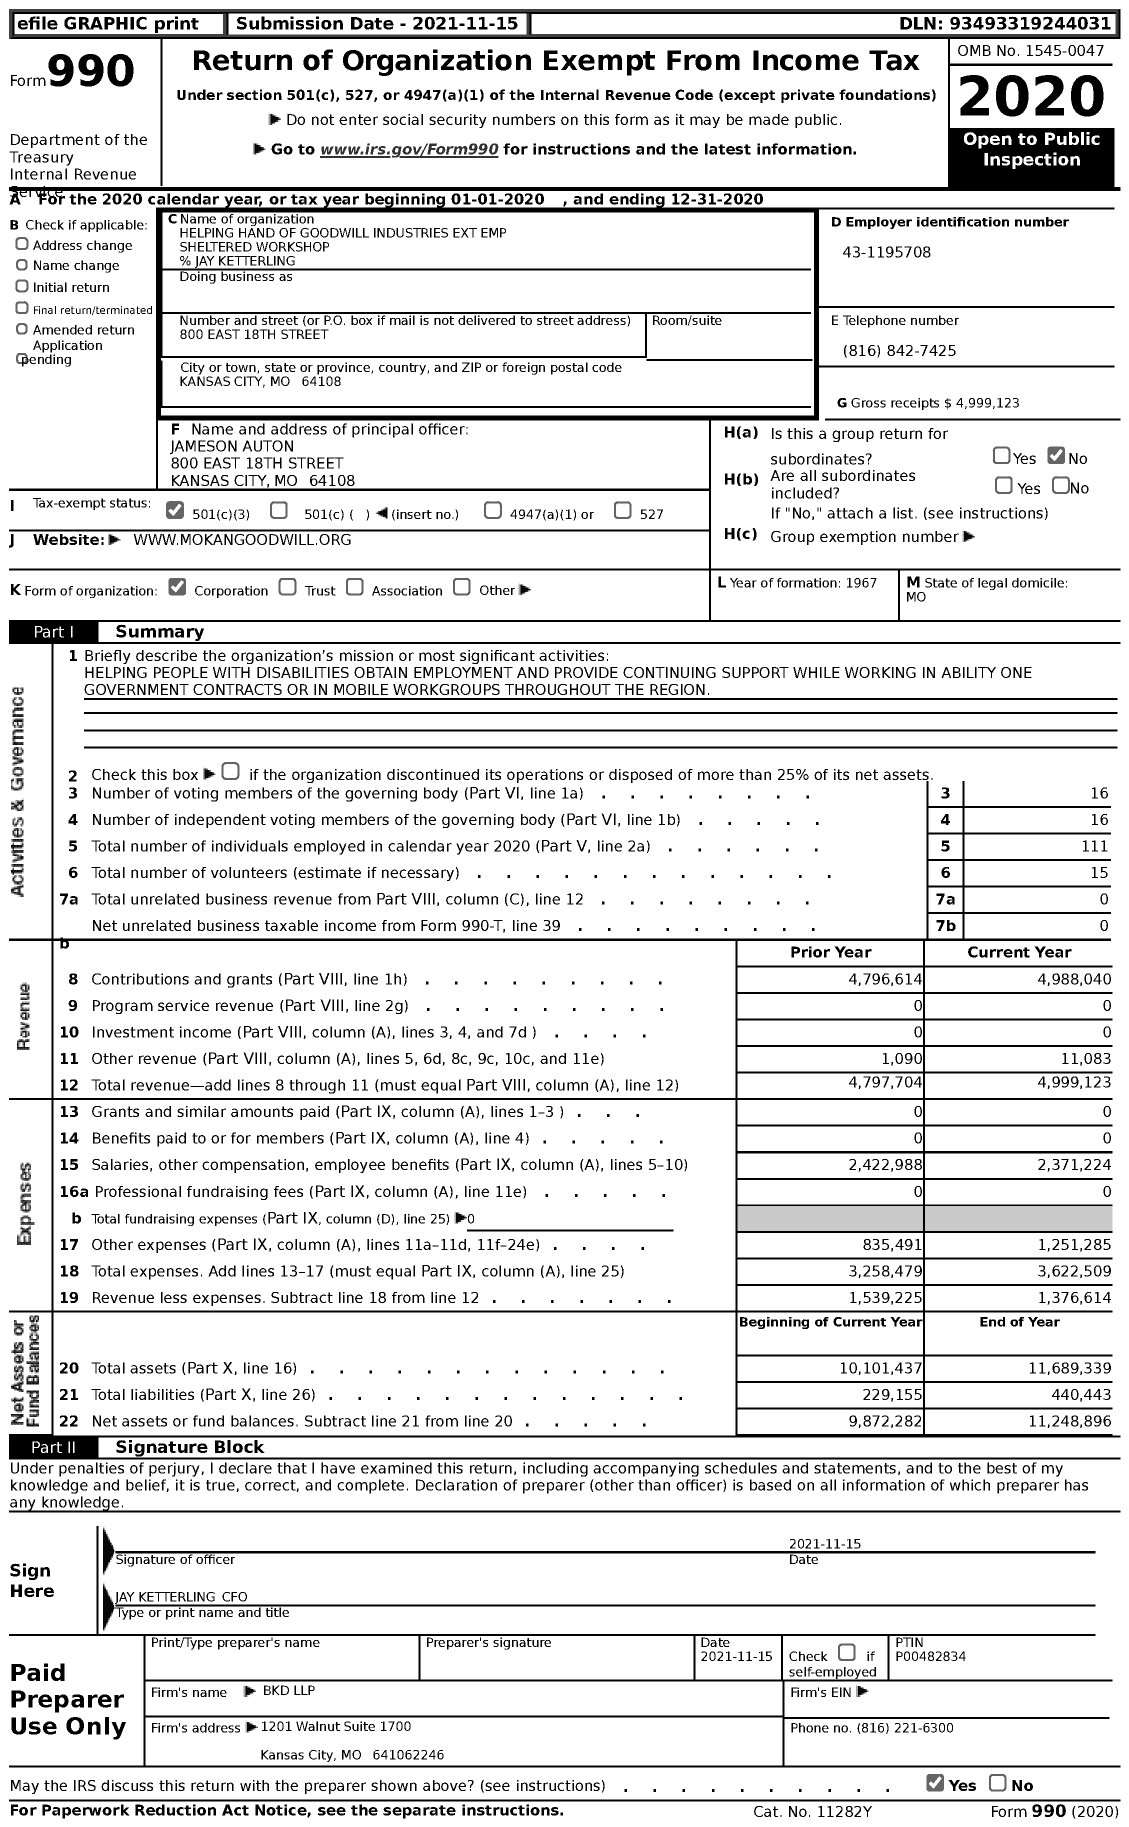 Image of first page of 2020 Form 990 for Helping Hand of Goodwill Industries Ext Emp Sheltered Workshop